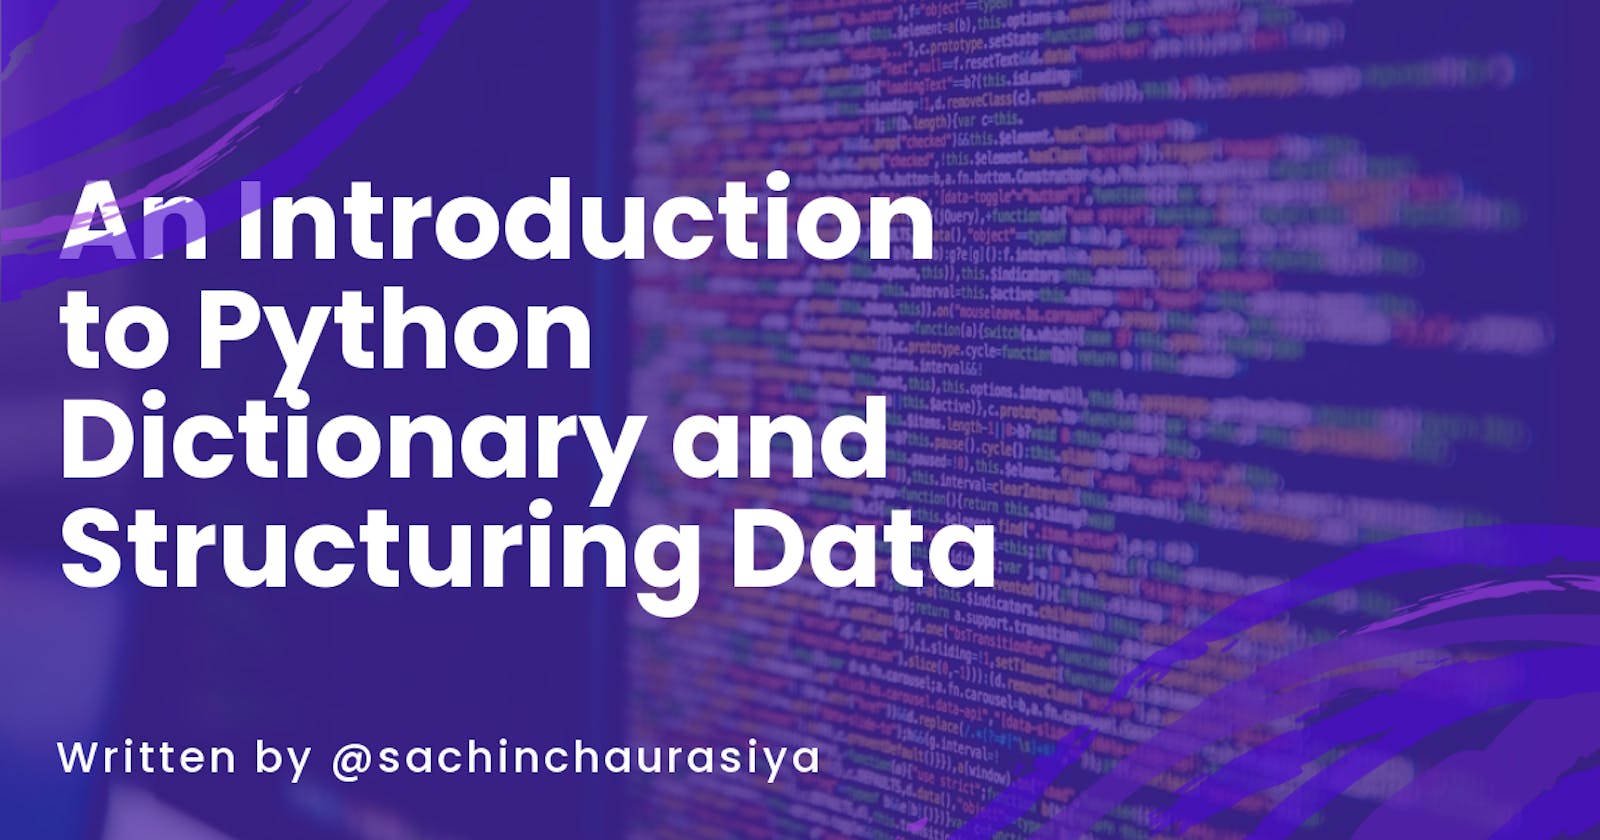 An Introduction to Python Dictionary and Structuring Data